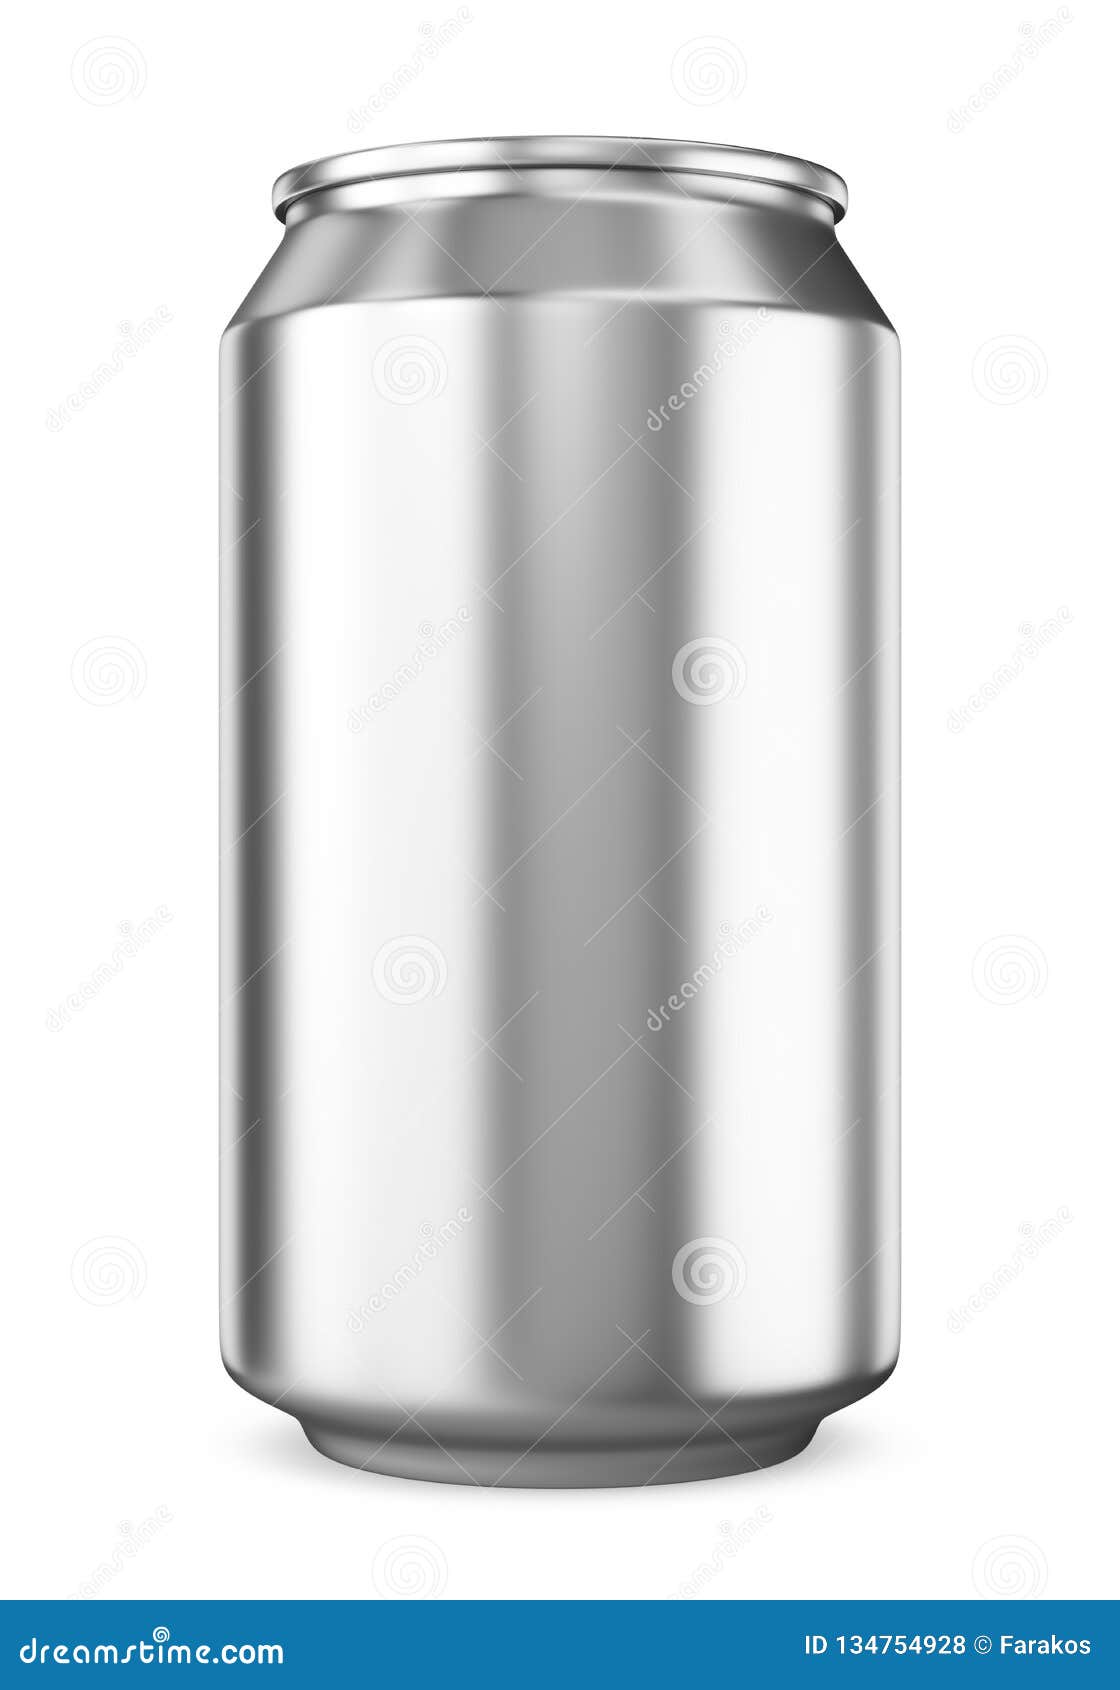 Single Blank Metallic Beer Can Isolated on White Stock Illustration ...